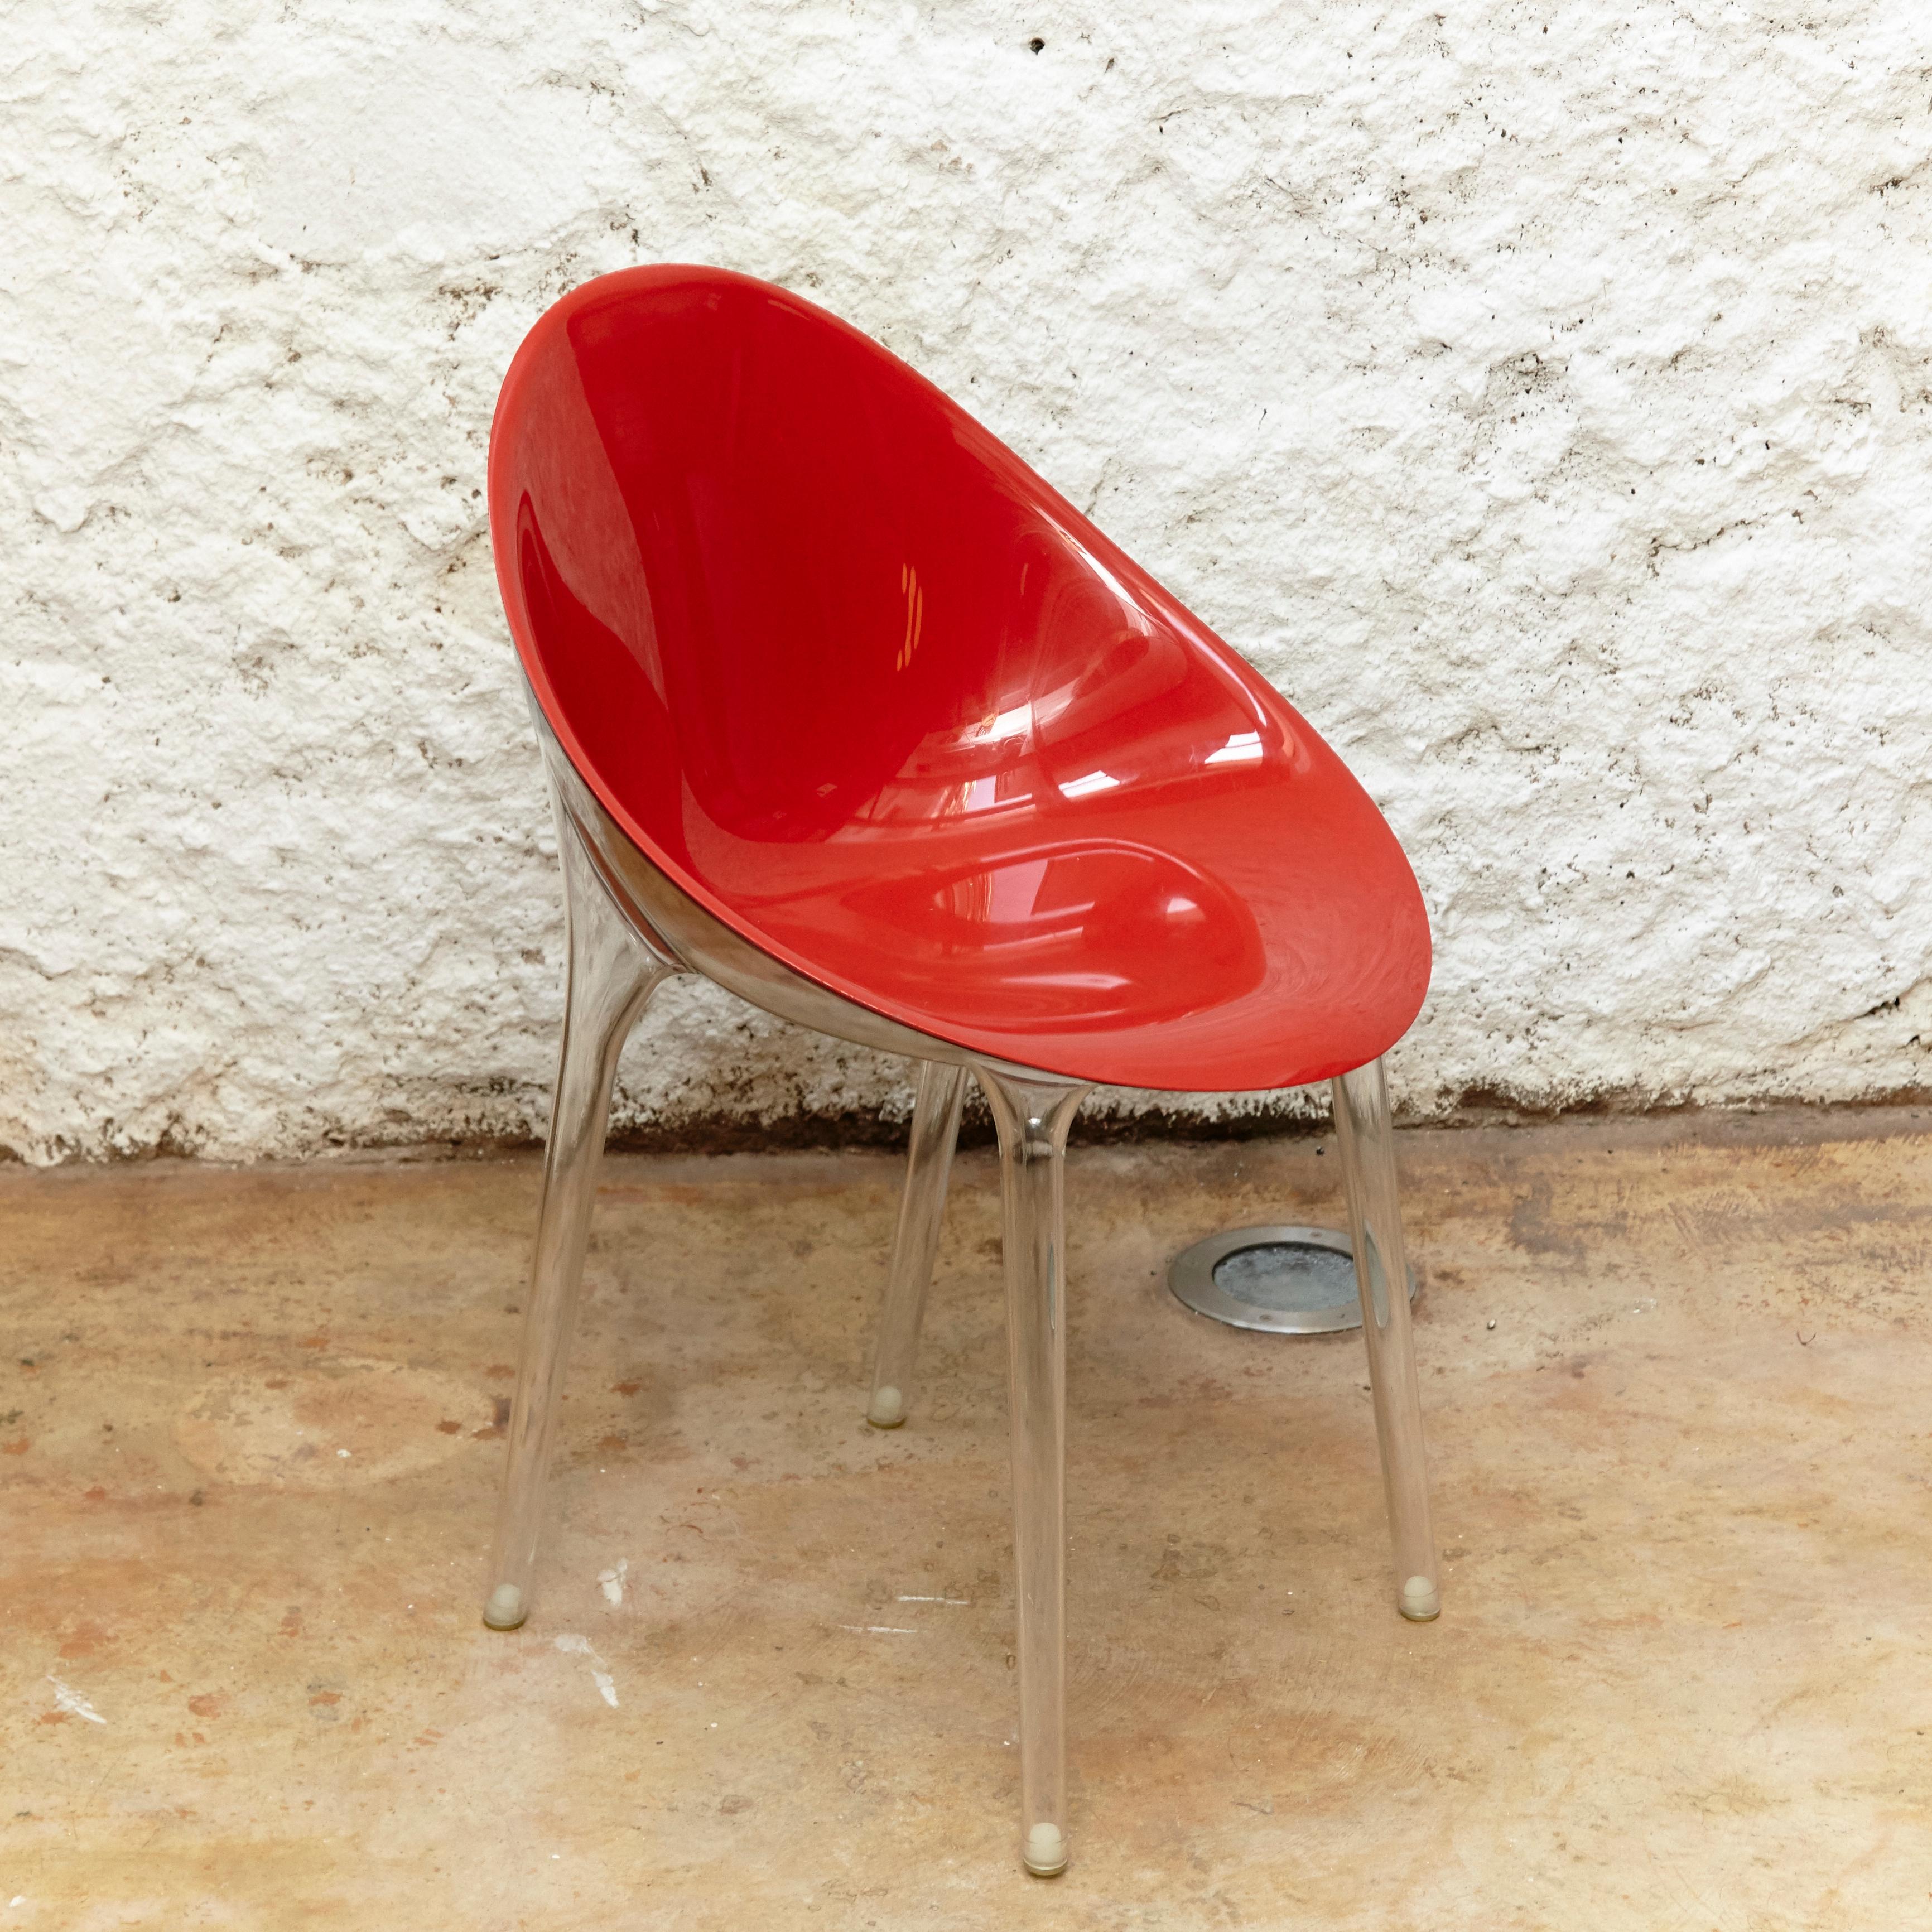 Italian Set of 4 Philippe Starck Impossible Chair Red by Kartell, circa 2008